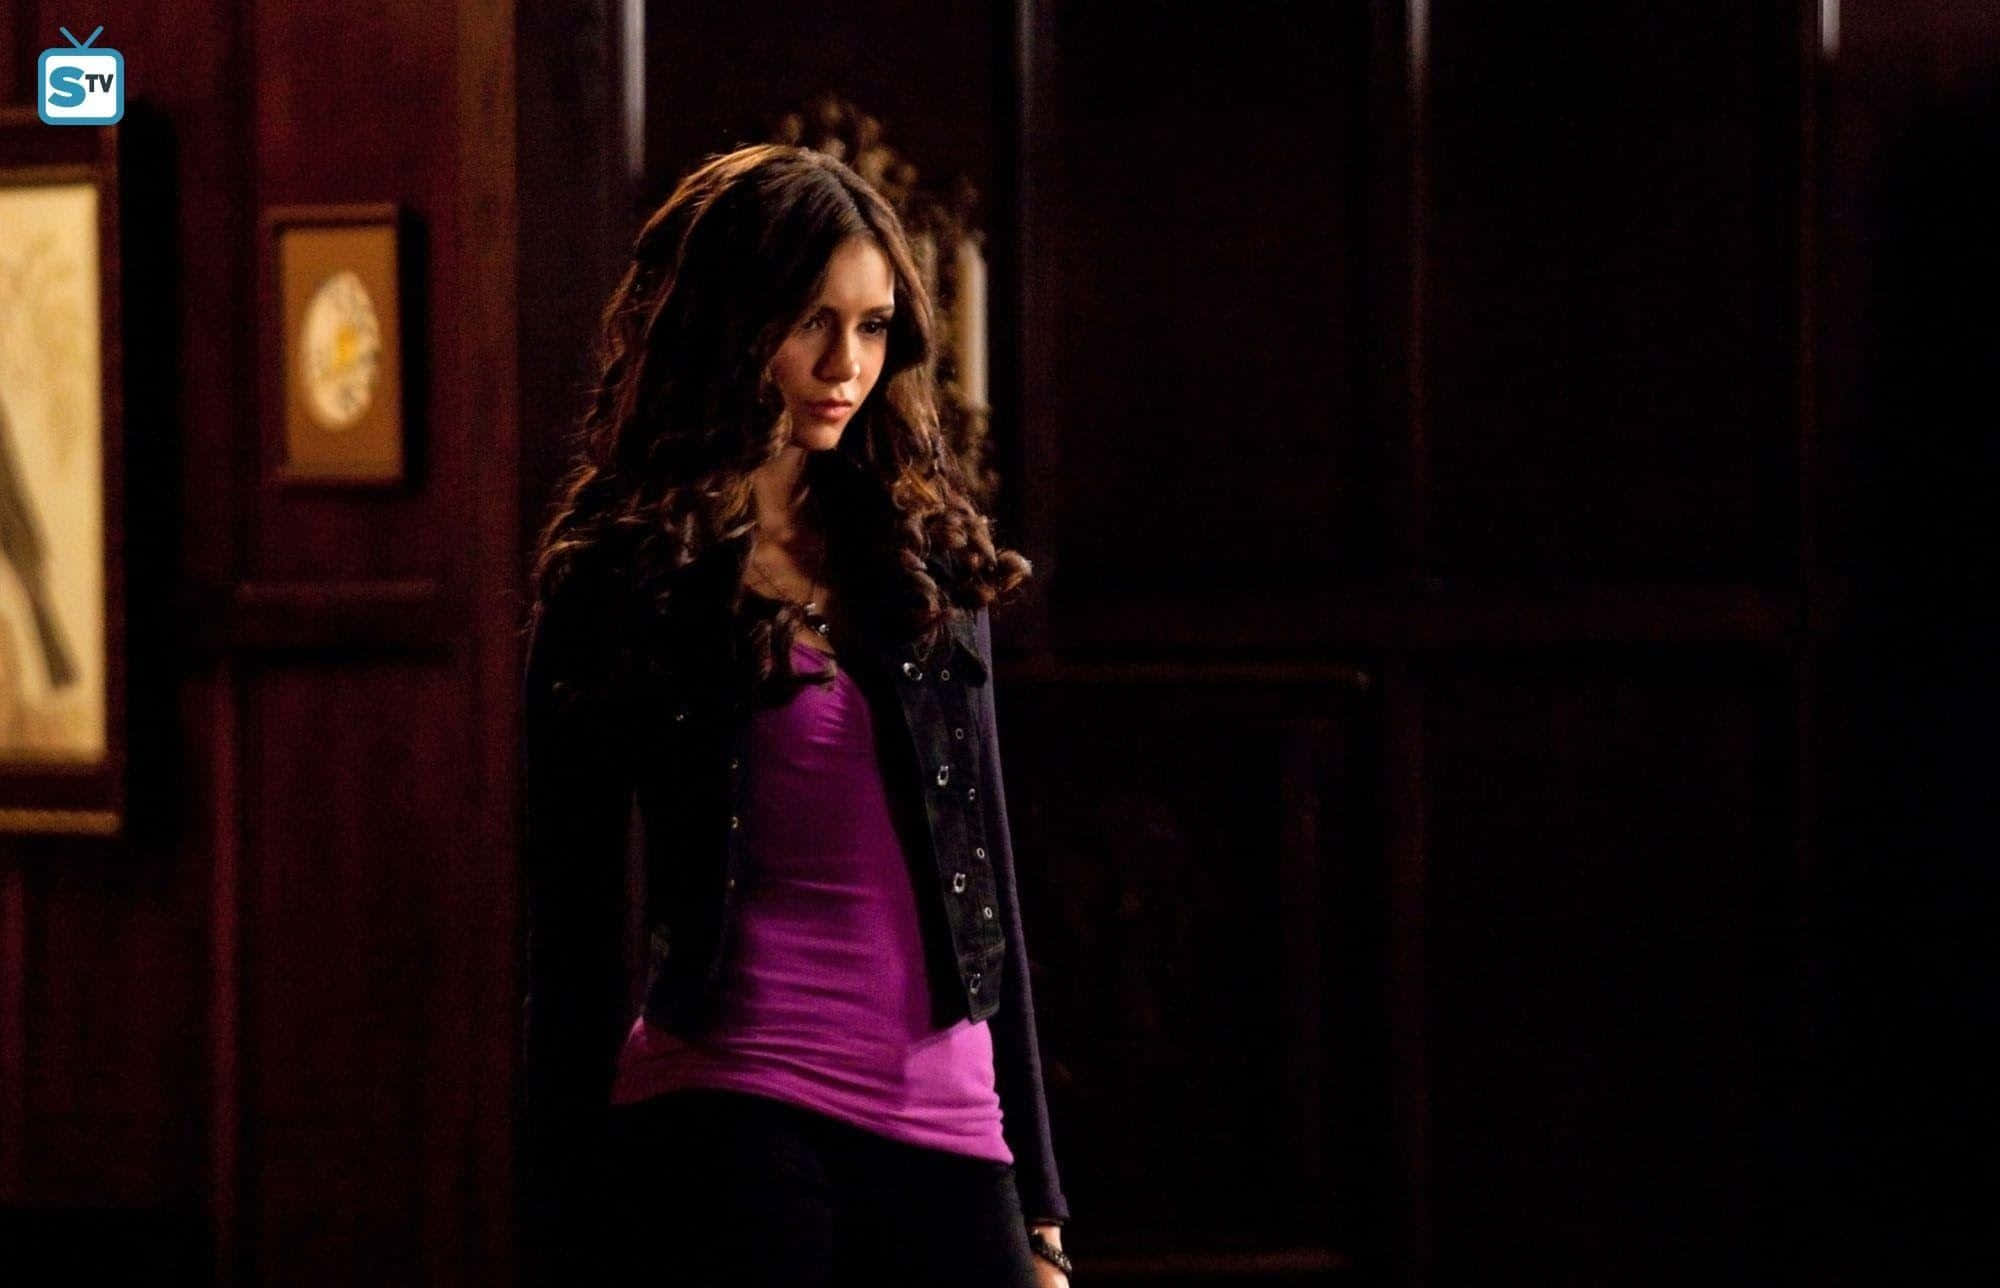 Undying Beauty: Katherine Pierce In Mystic Falls Background